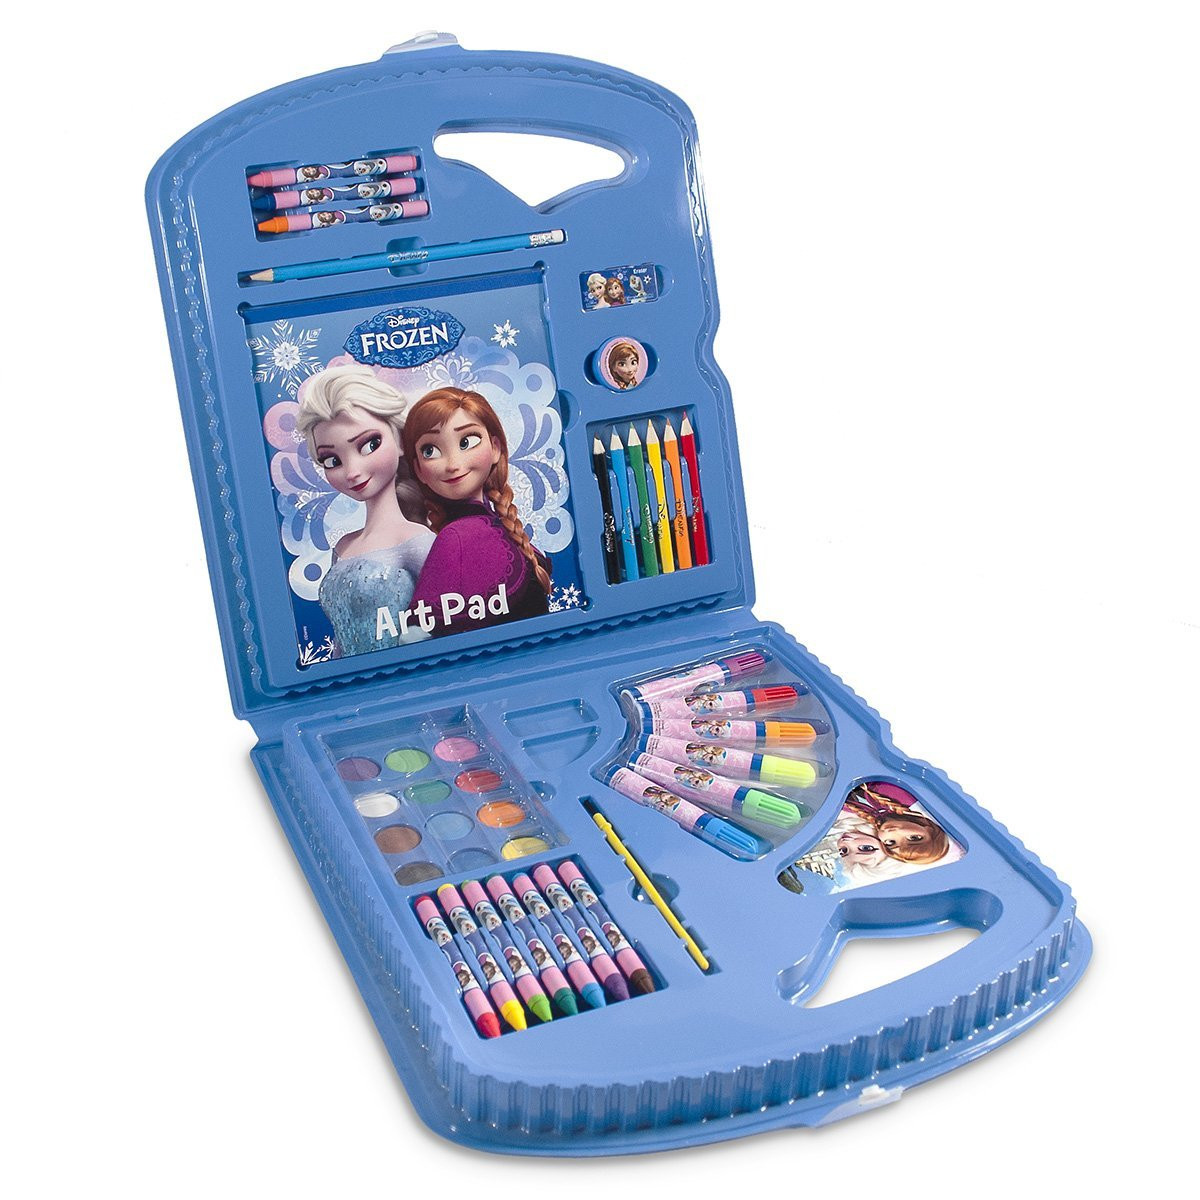 Arts And Crafts Sets For Kids
 Disney Frozen Crafts and Activity Sets